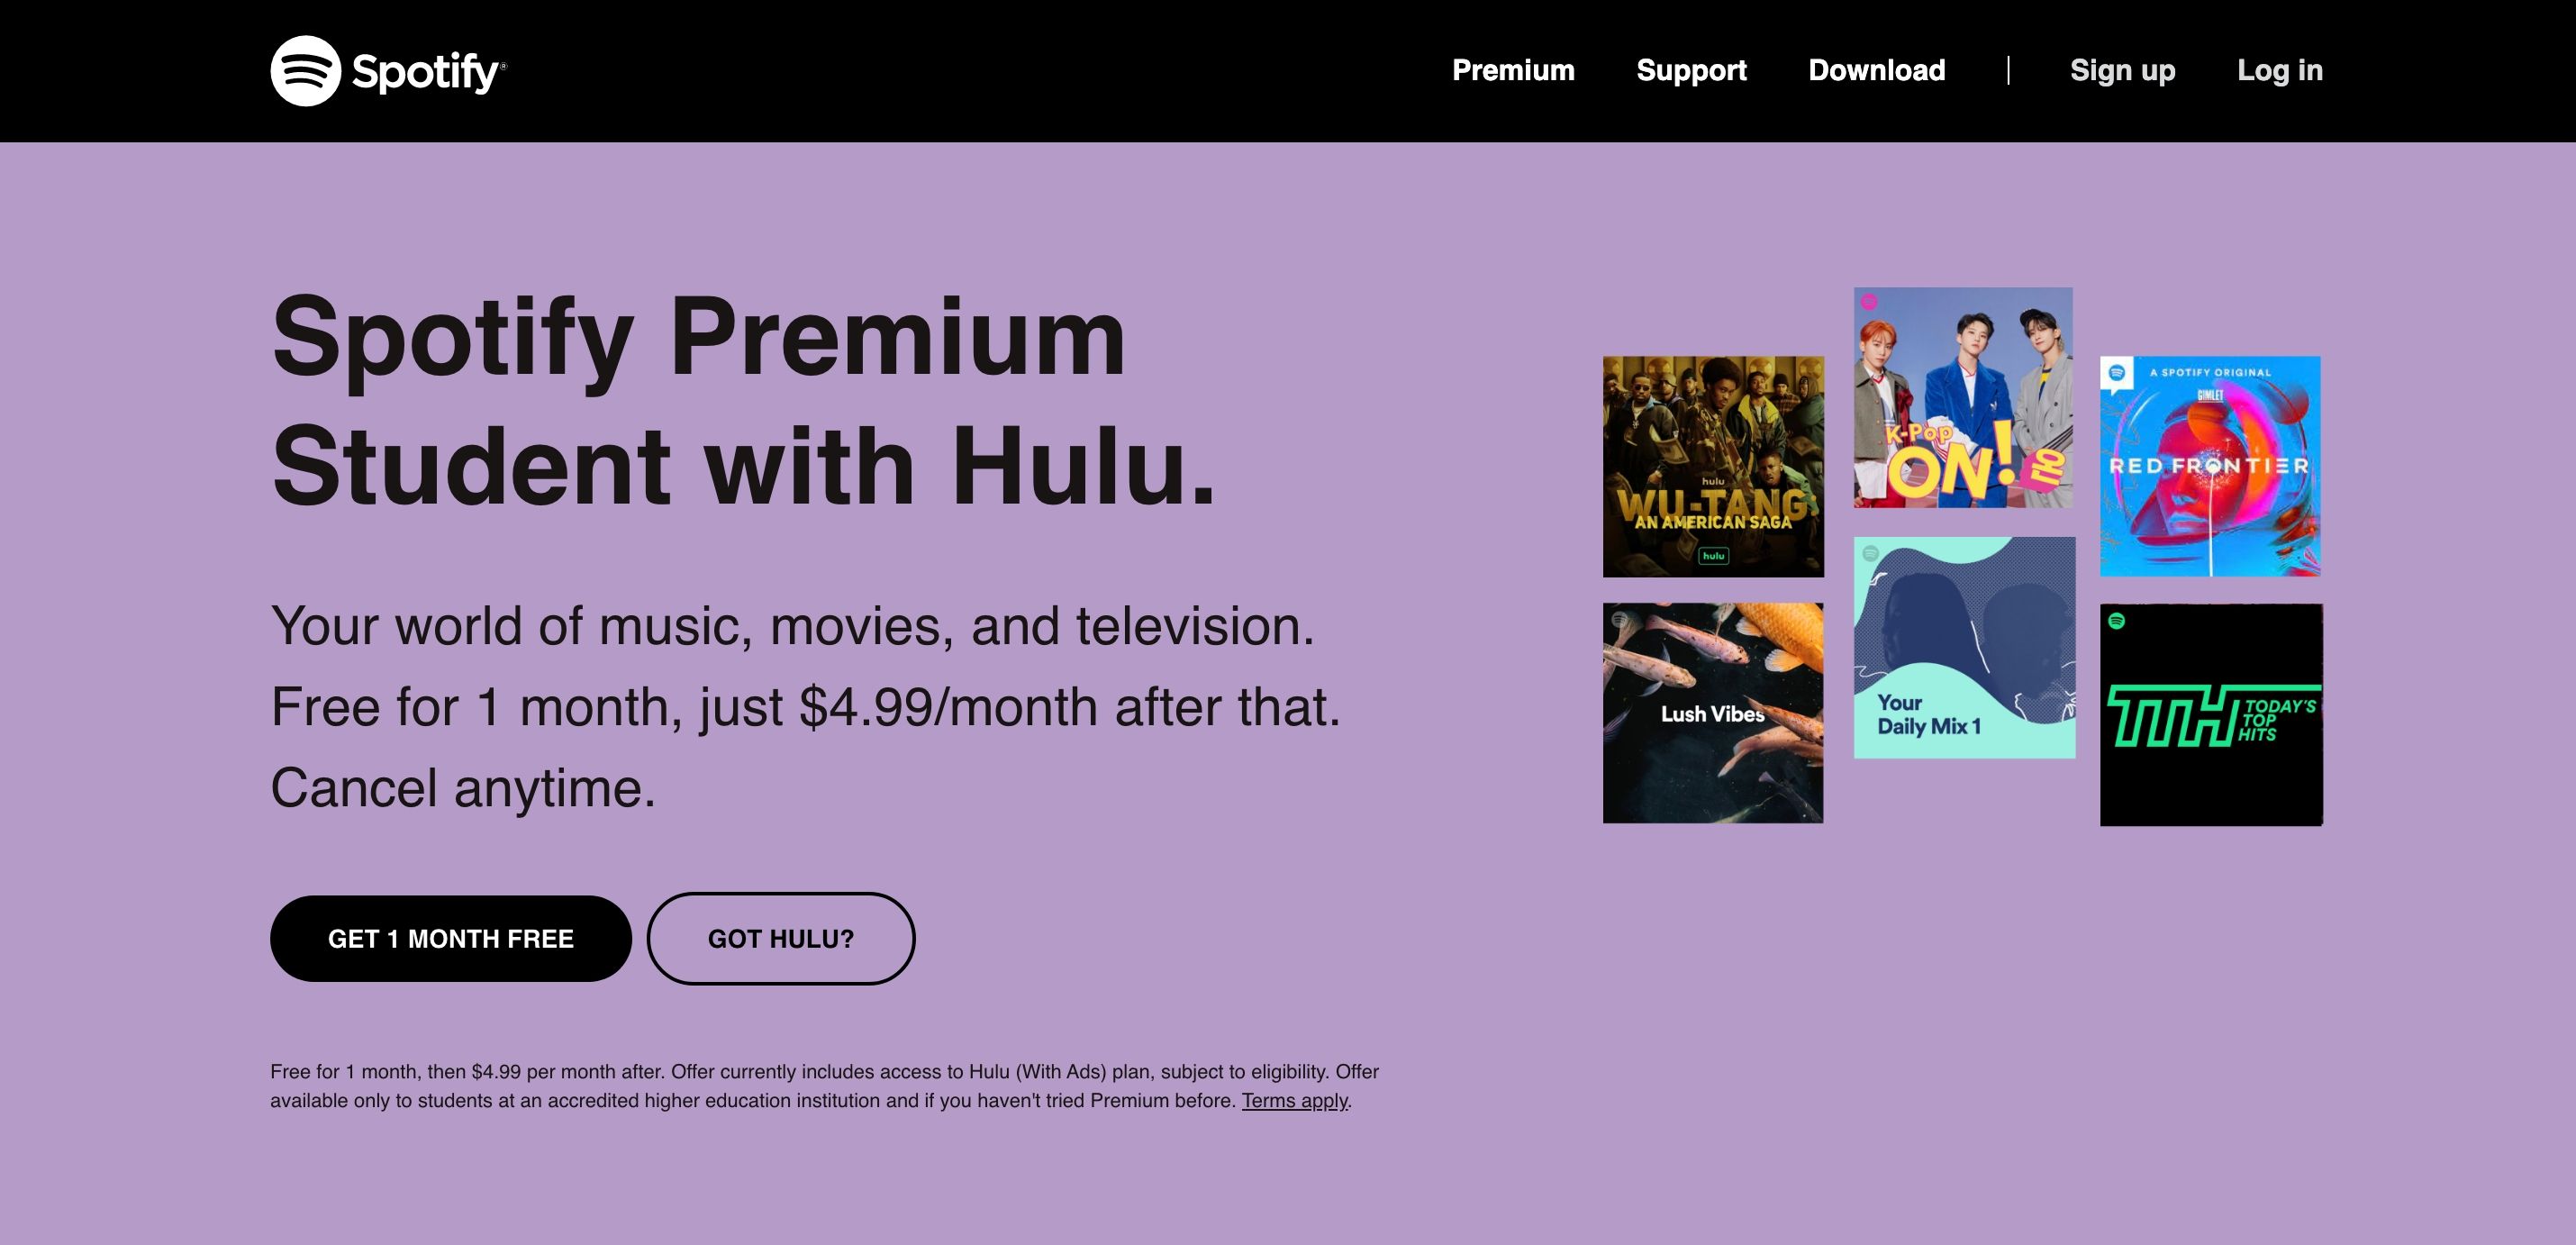 Spotify Premium Student discount page